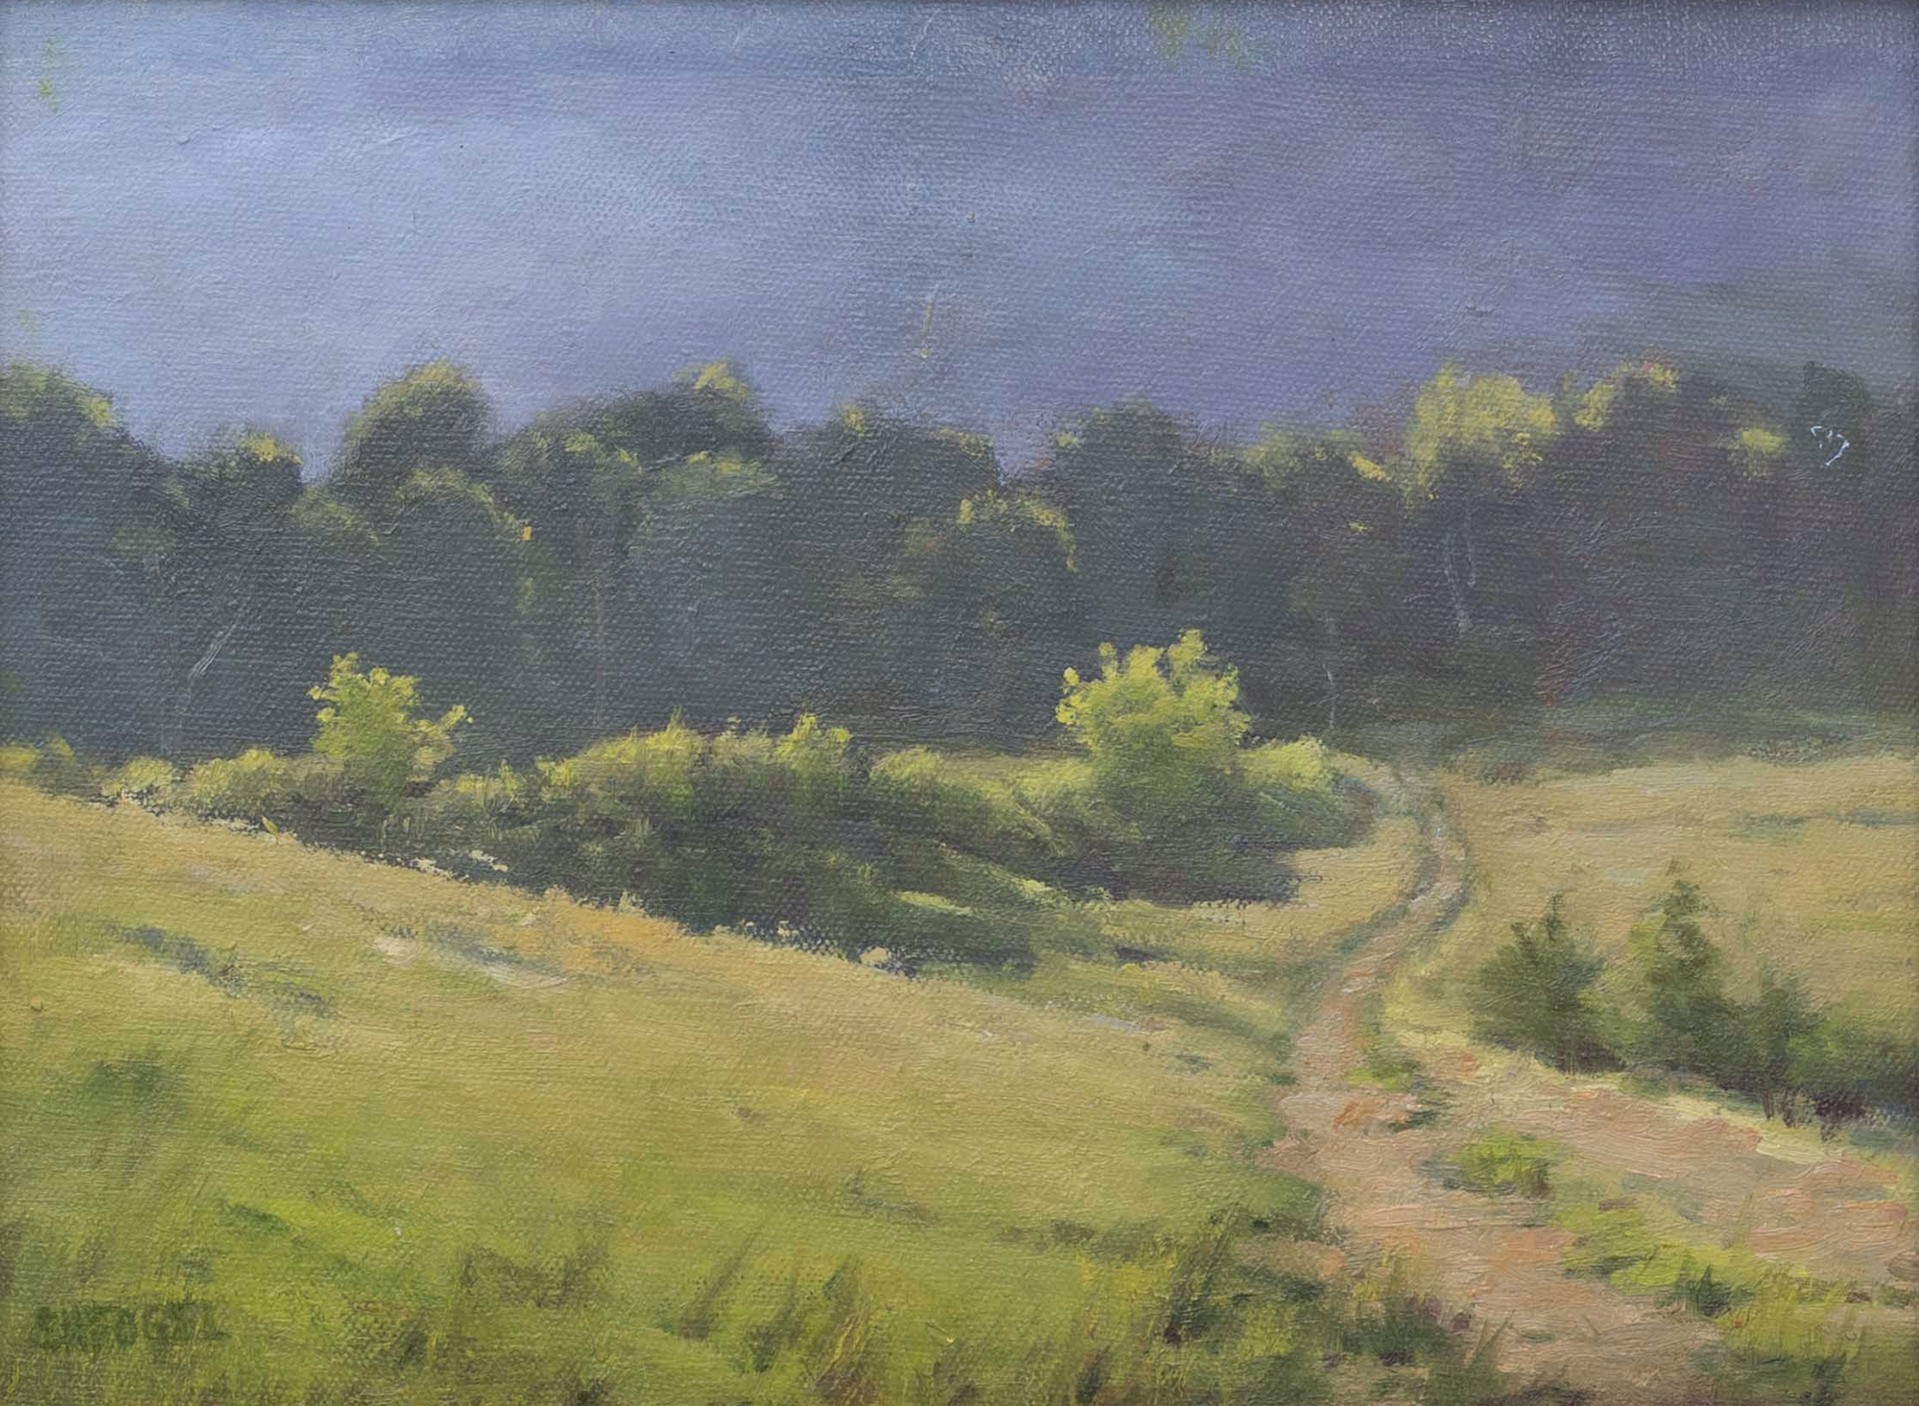 Lower Road at the Old Rickey Farm by Susan Hope Fogel